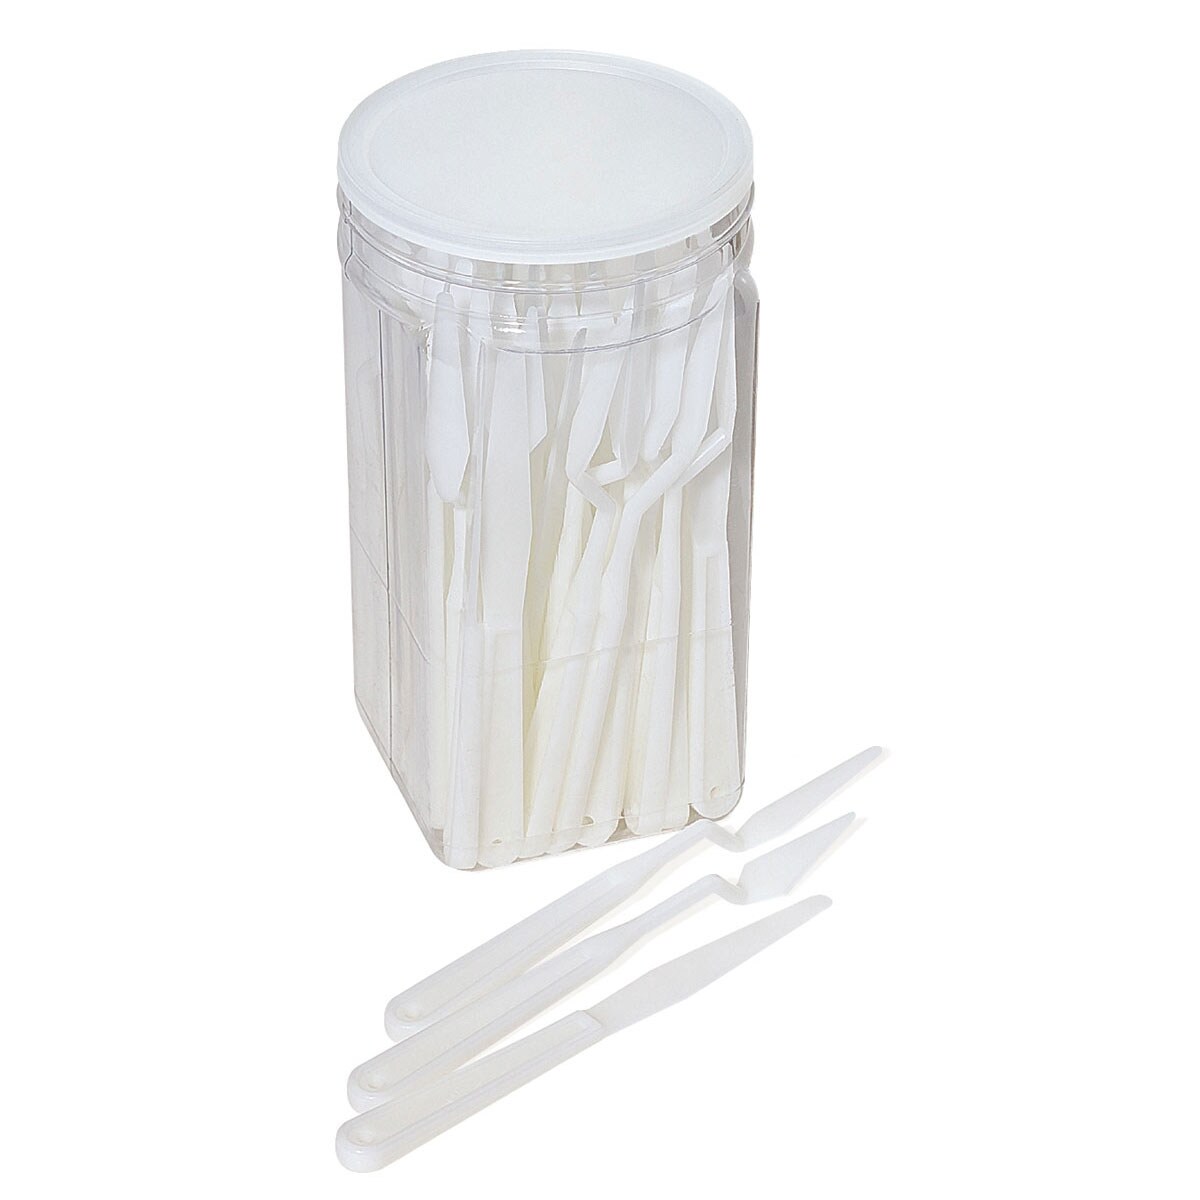 Richeson Plastic Painting Knive Canister - Assorted, Canister of 60